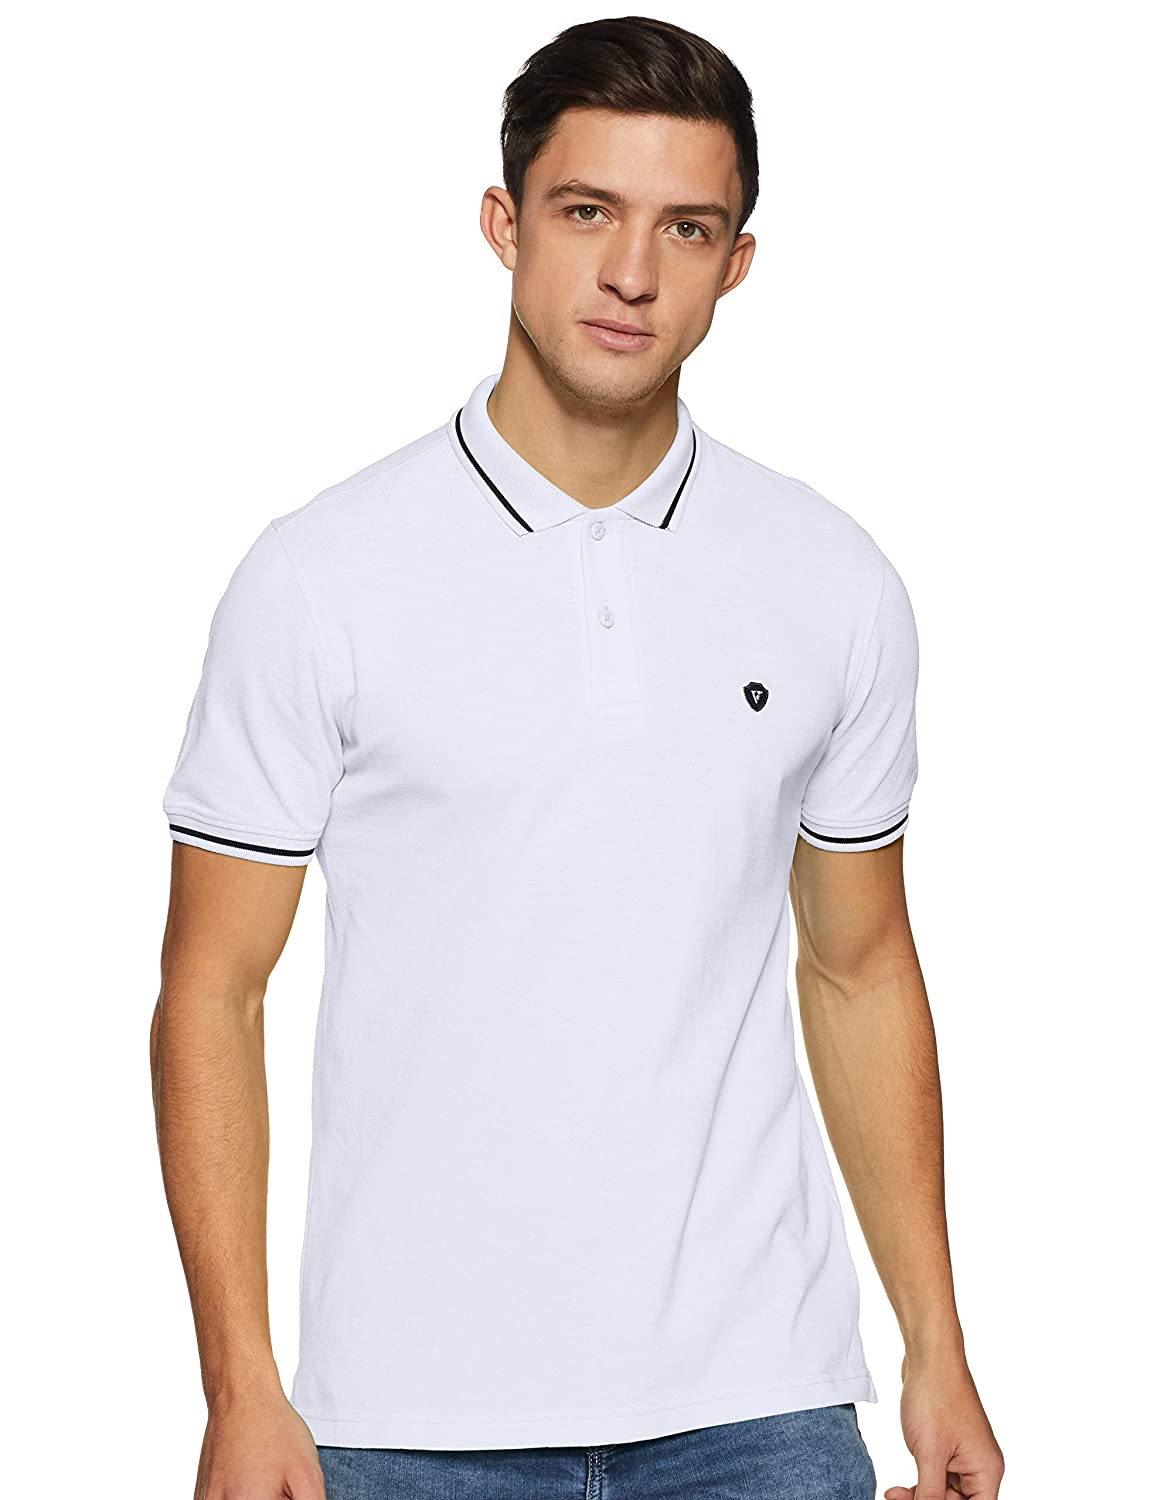 Classic T-Shirt - Luxury T-shirts and Polos - Ready to Wear